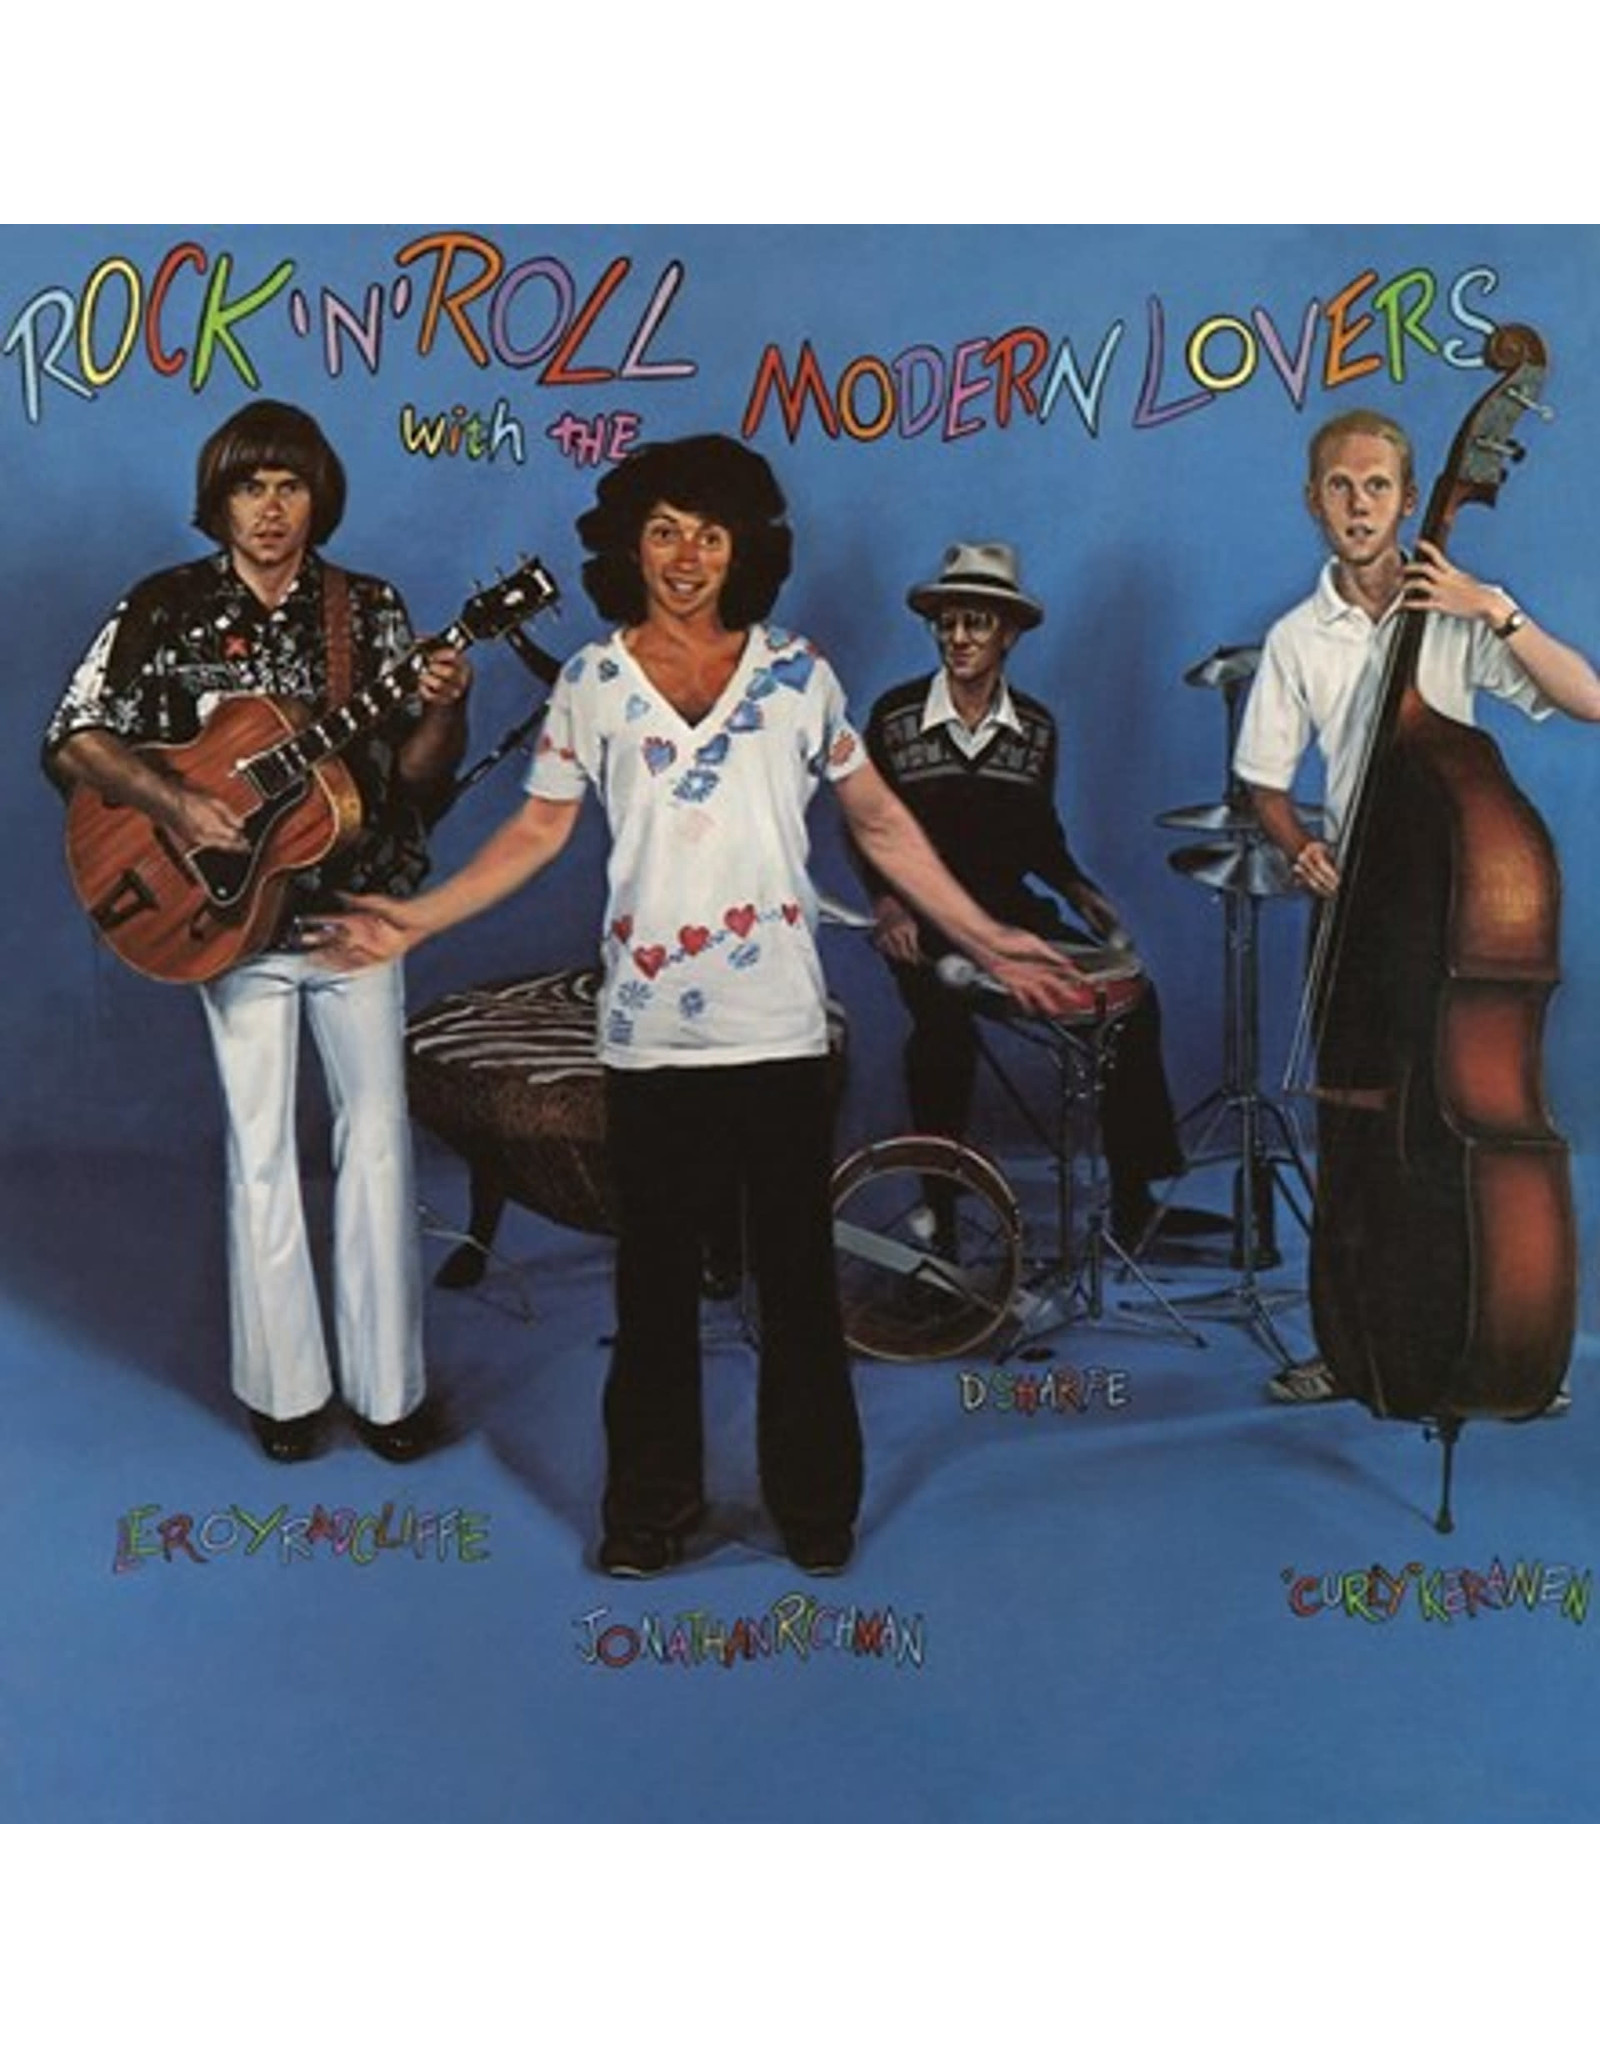 Omnivore Richman, Jonathan & The Modern Lovers: Rock N Roll with LP